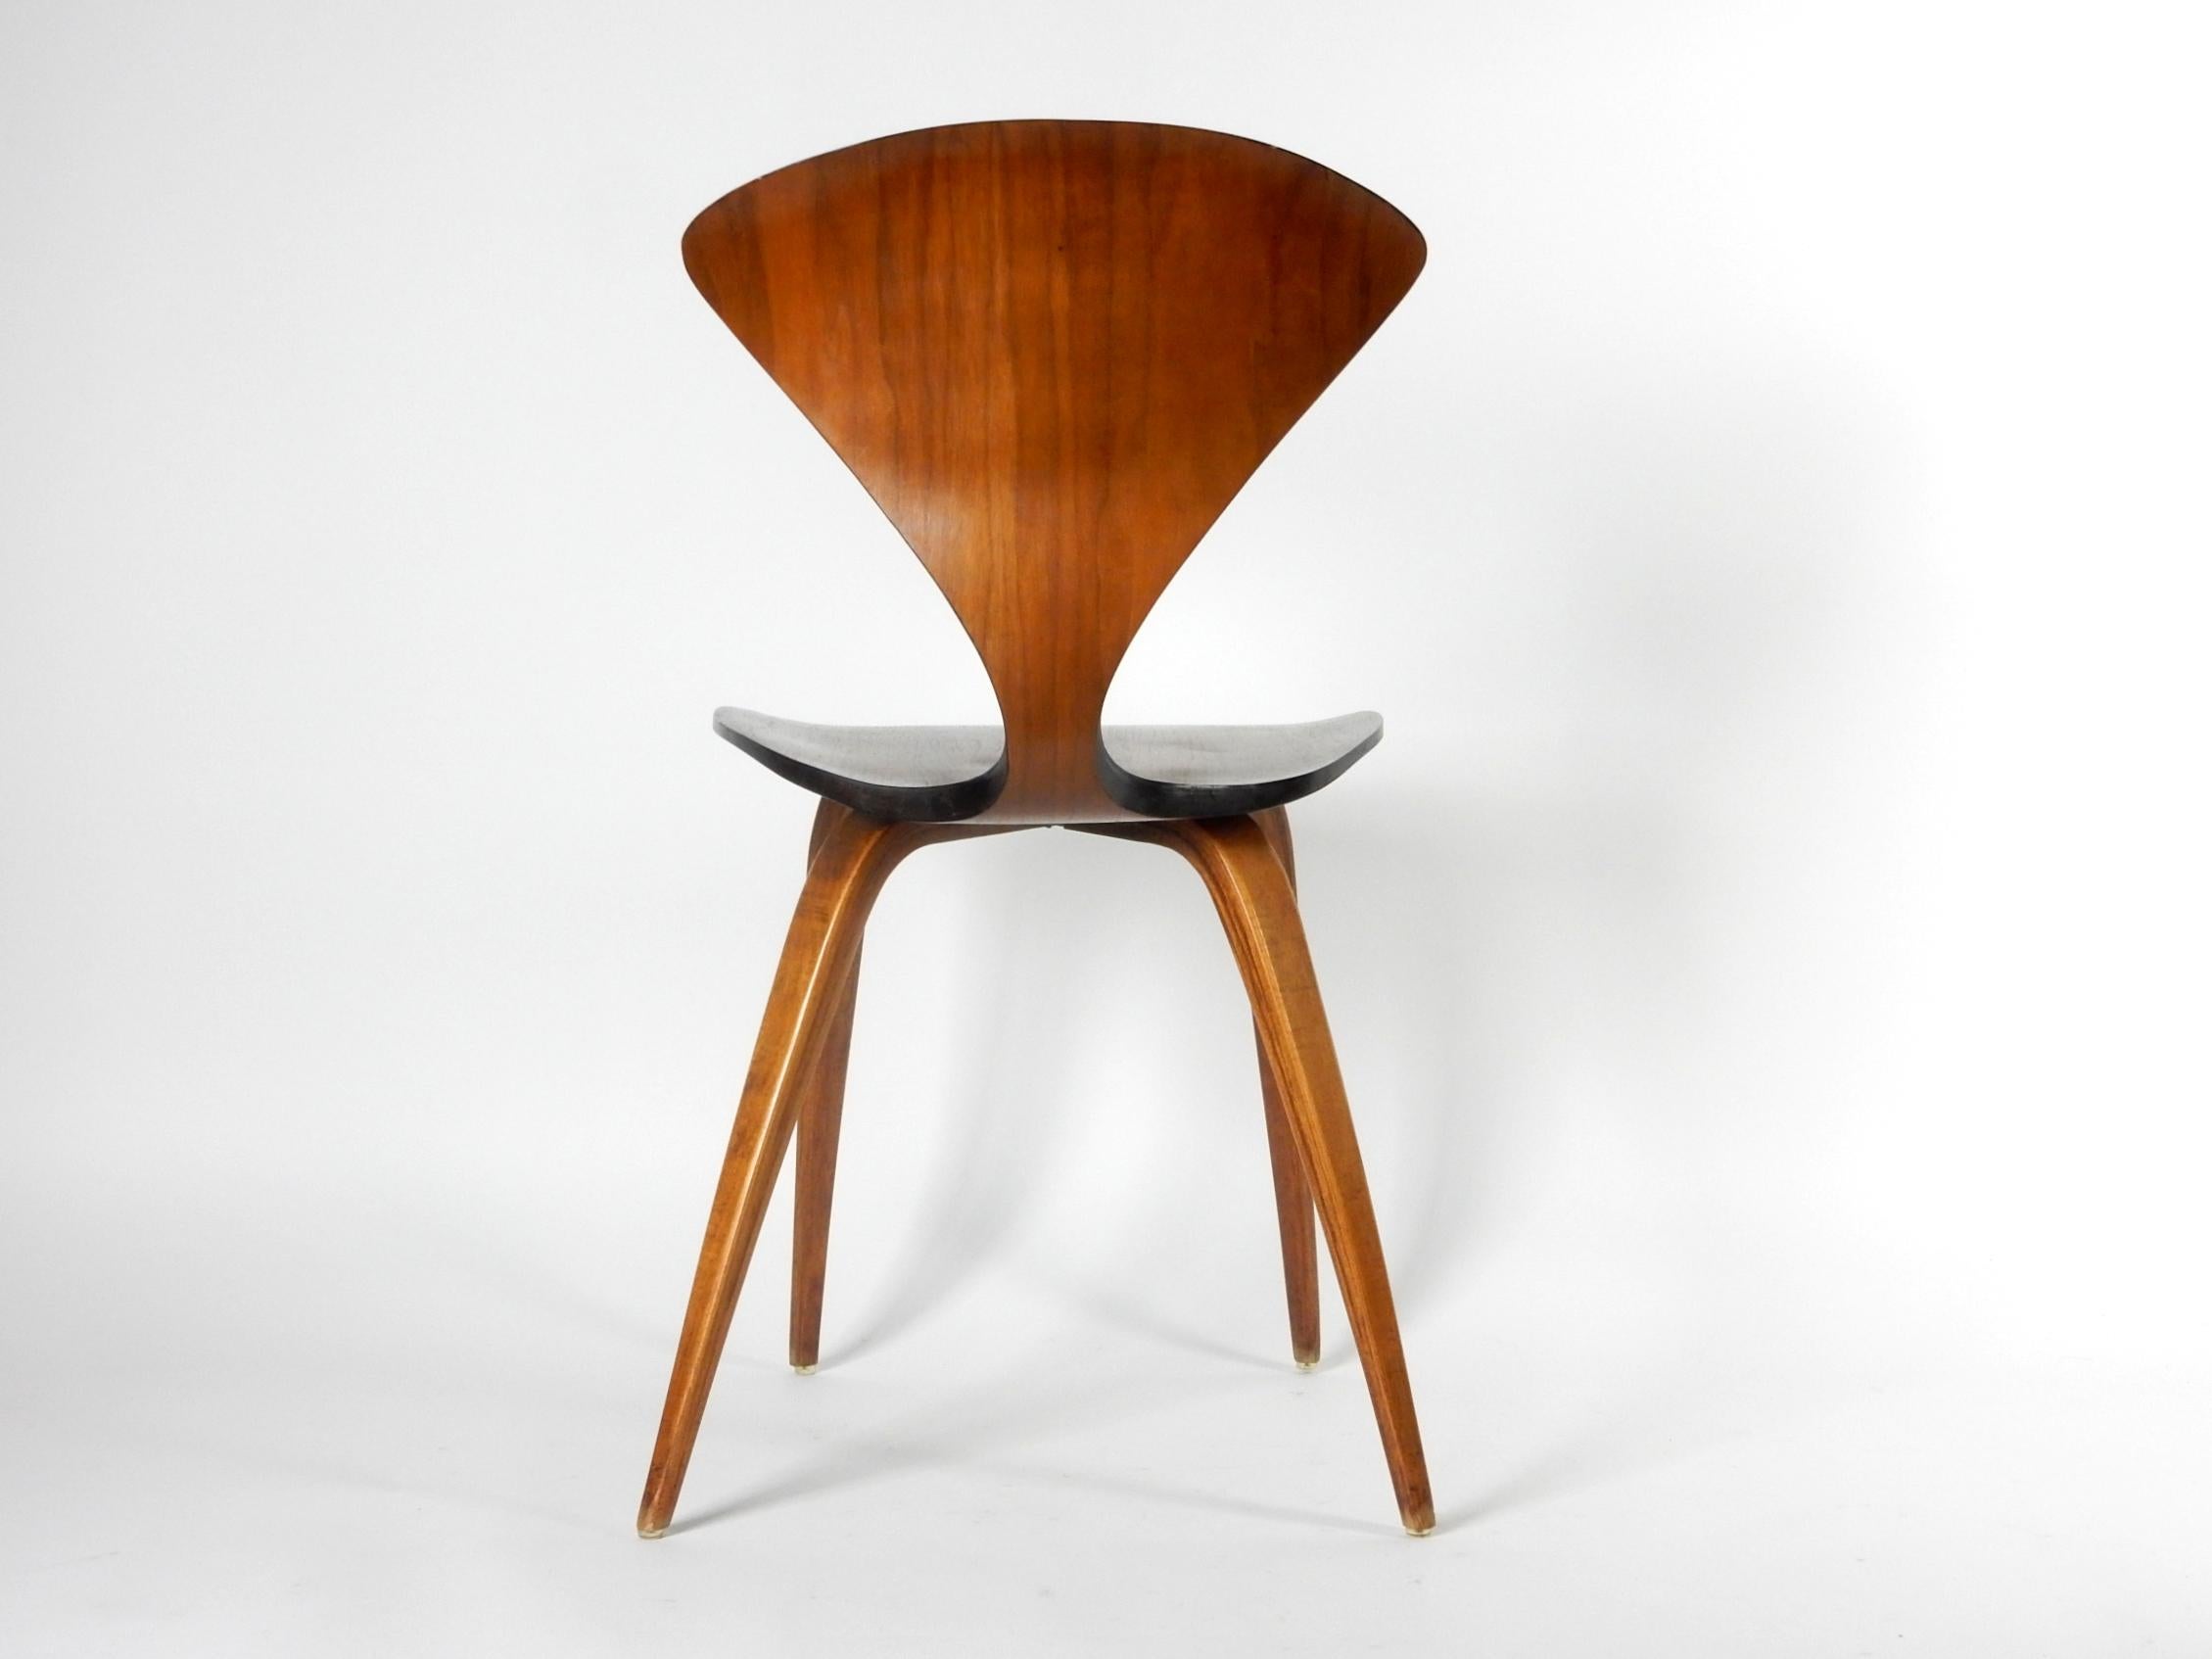 Iconic Mid-Century Modern side chair designed by Norman Cherner for Plycraft.
Functional art from the 1950s. It's original condition showing loved and well cared for.
Own an original, not a reproduction.